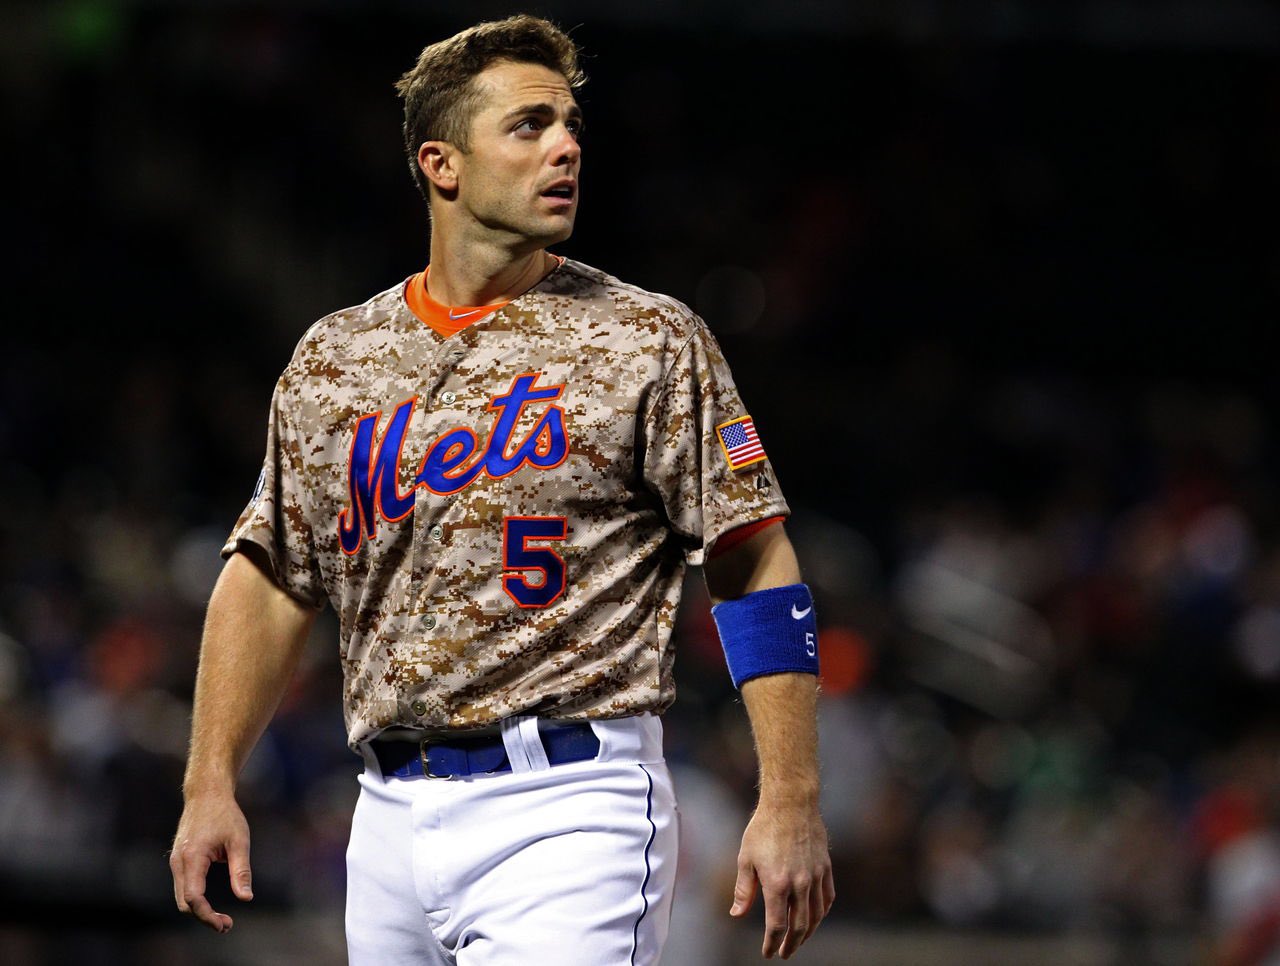 Mets Legends on X: Thoughts on the camo jerseys from back in the